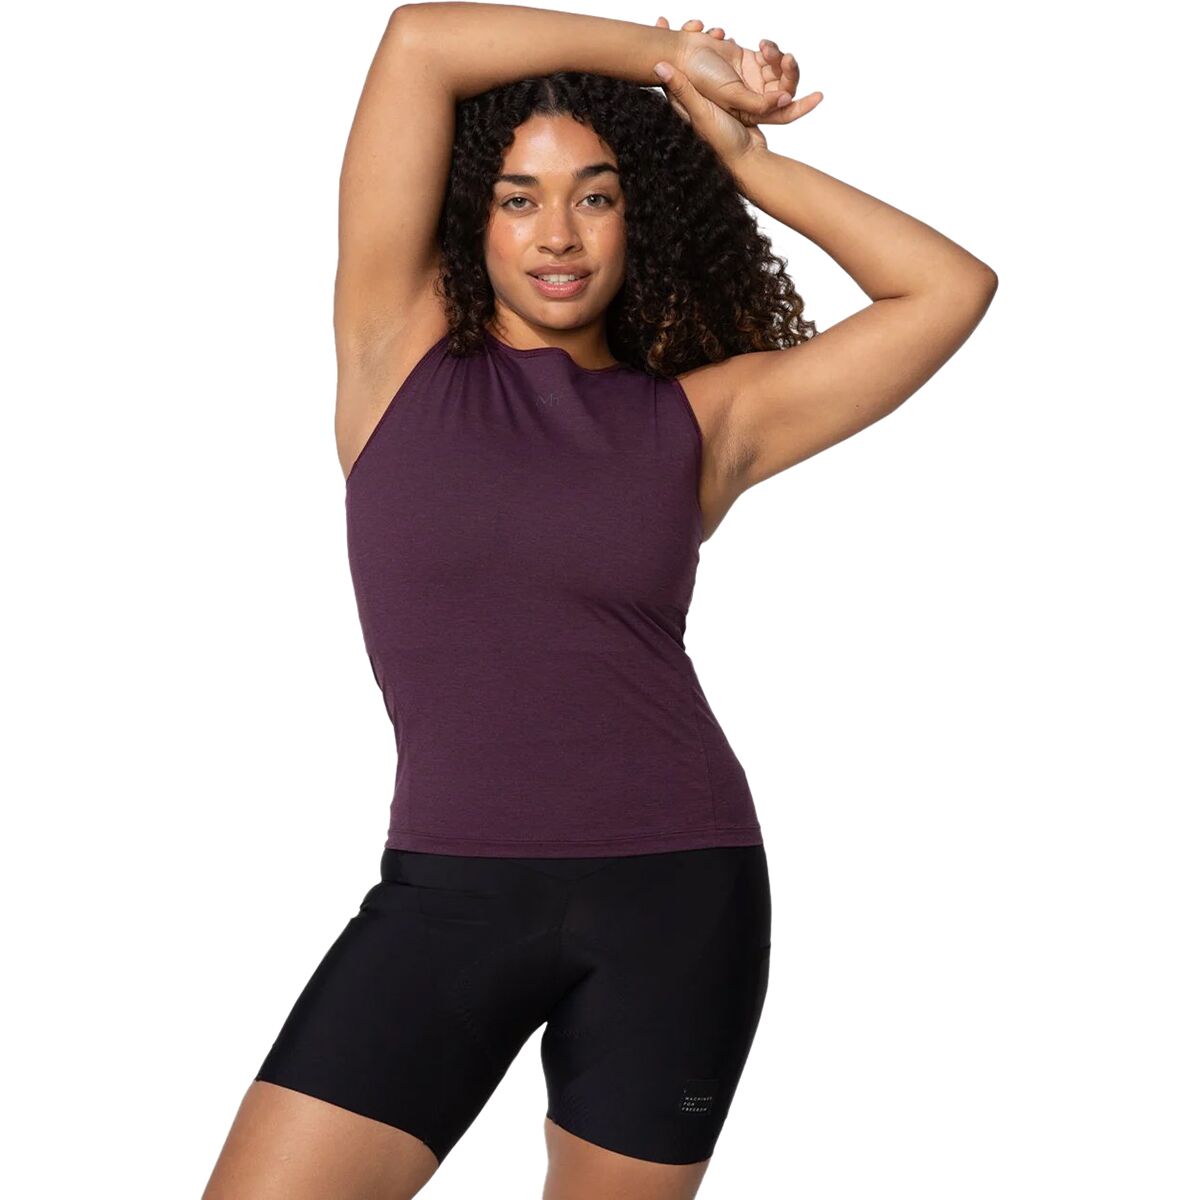 Machines for Freedom Sleeveless Base Layer Top - Women's